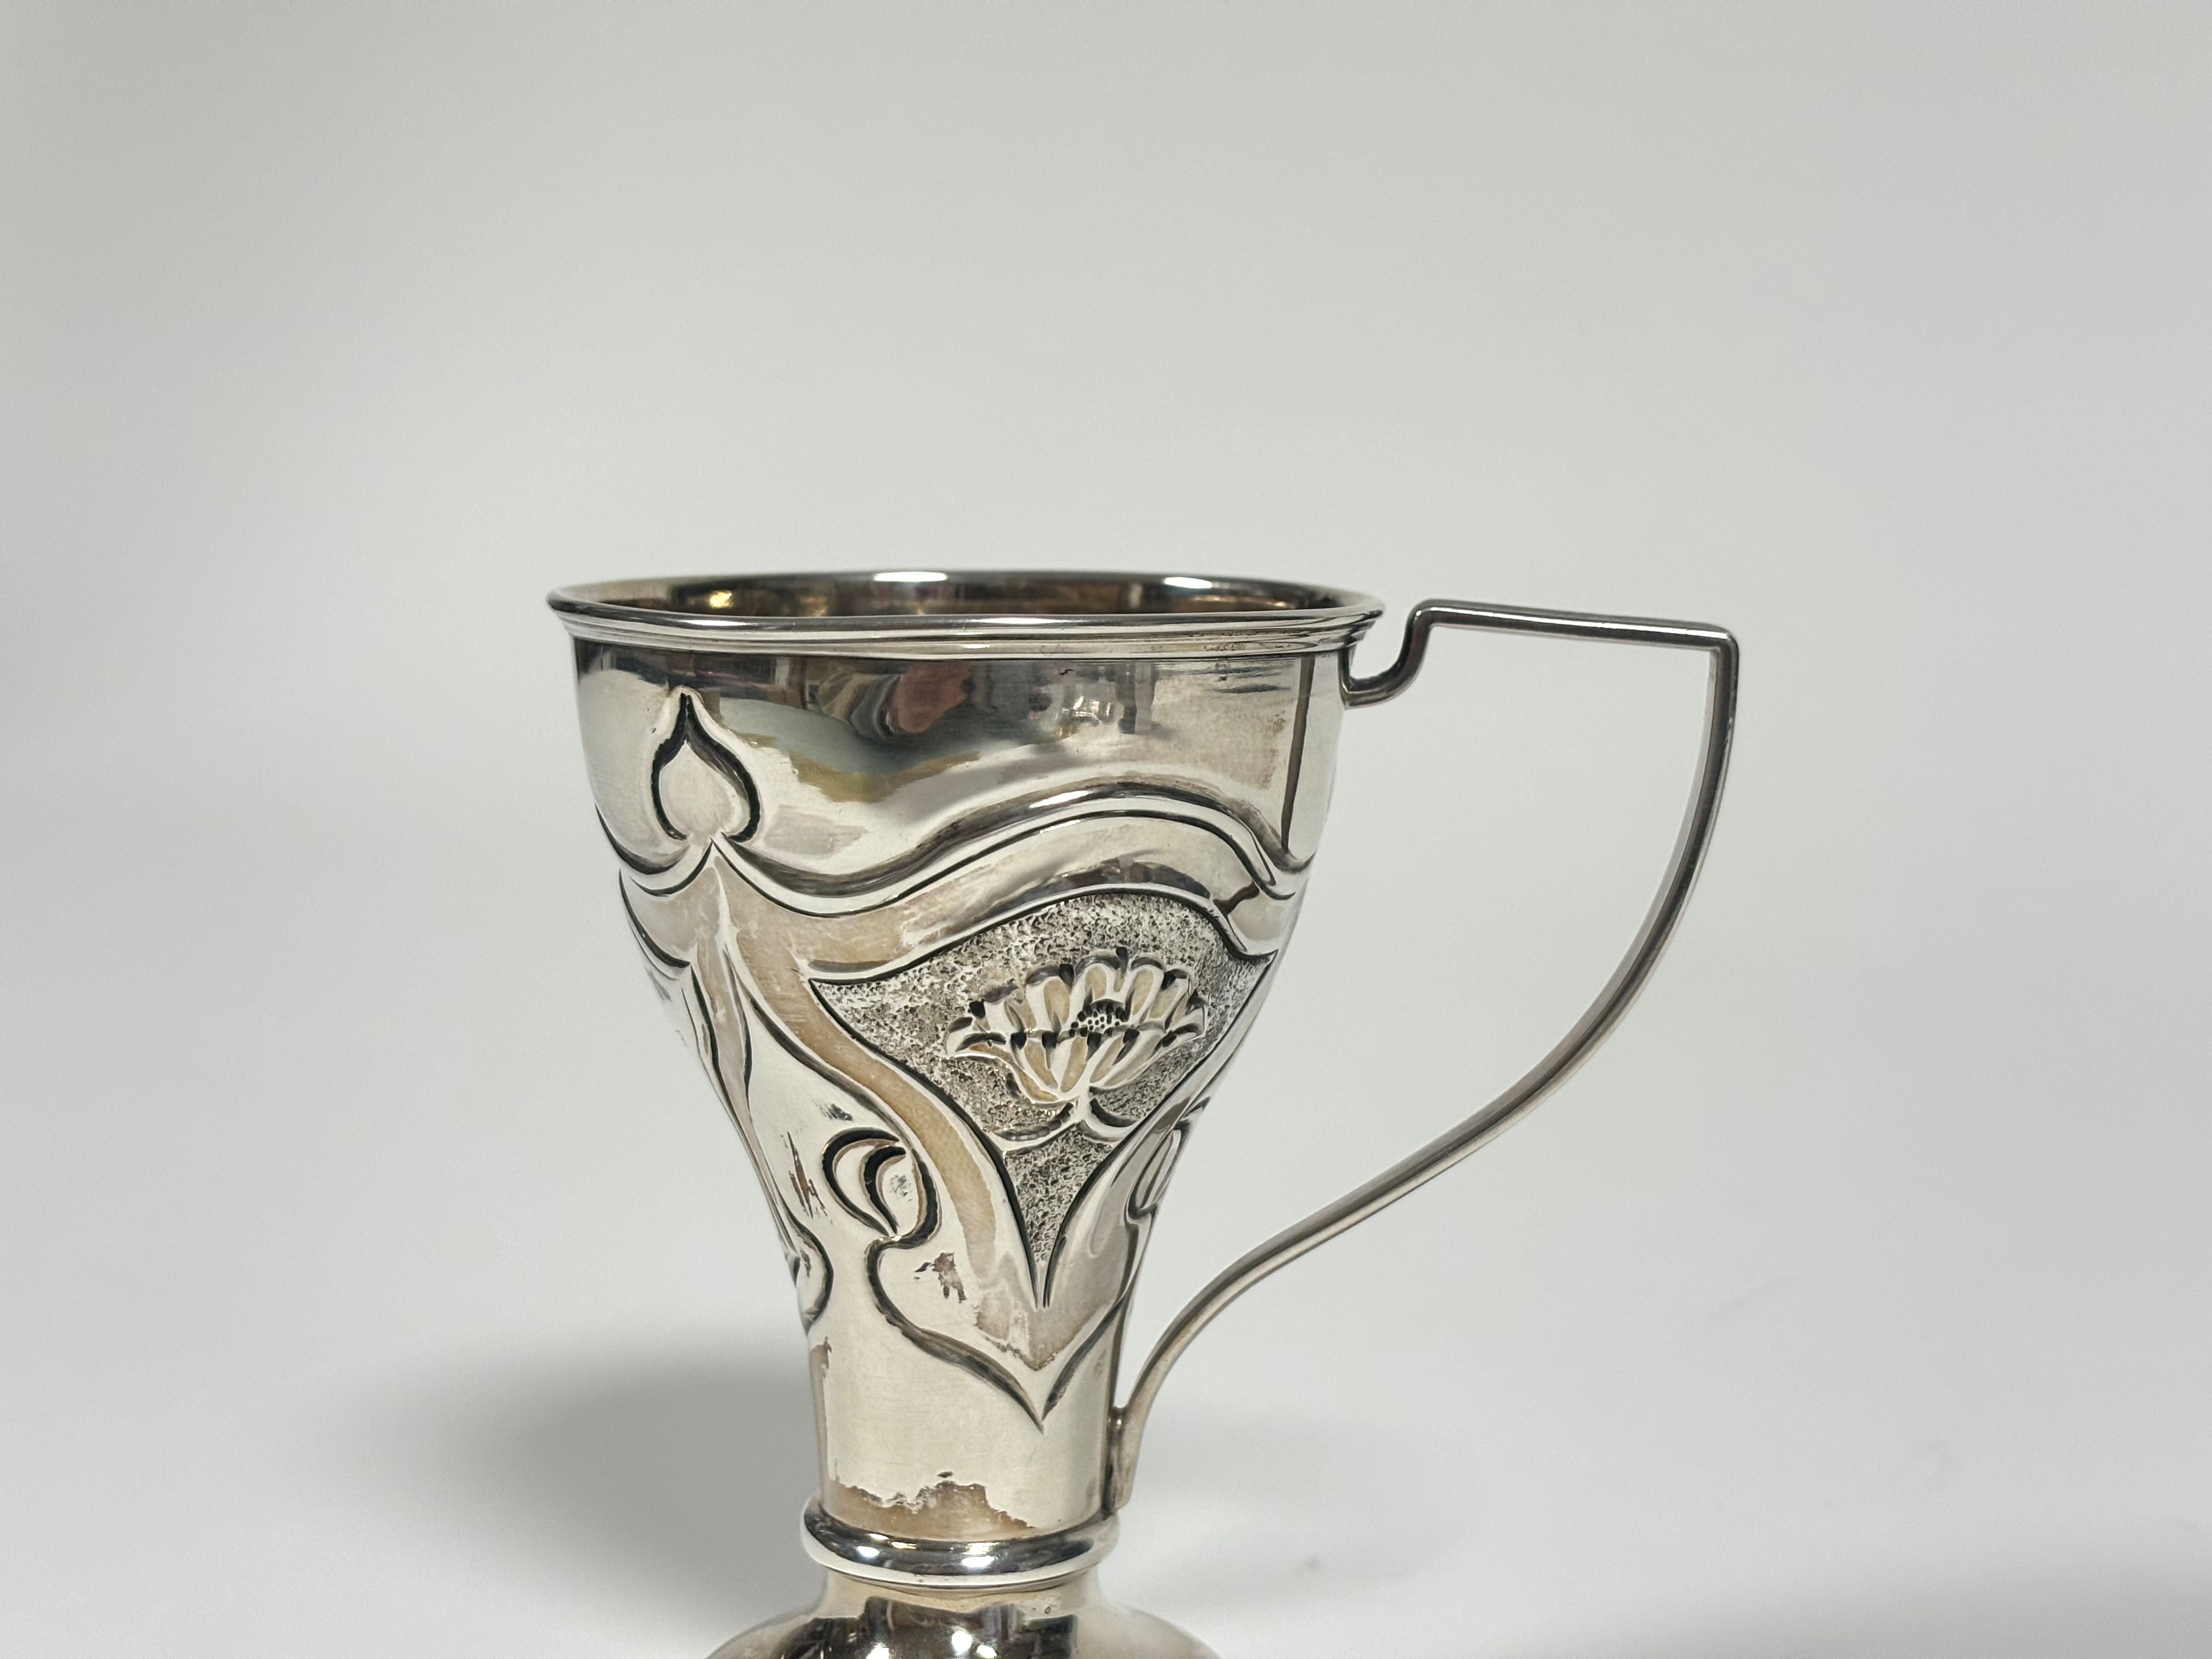 An Edwardian silver Christening cup in the Art Nouveau taste, Robert Pringle & Sons, Chester, - Image 3 of 7